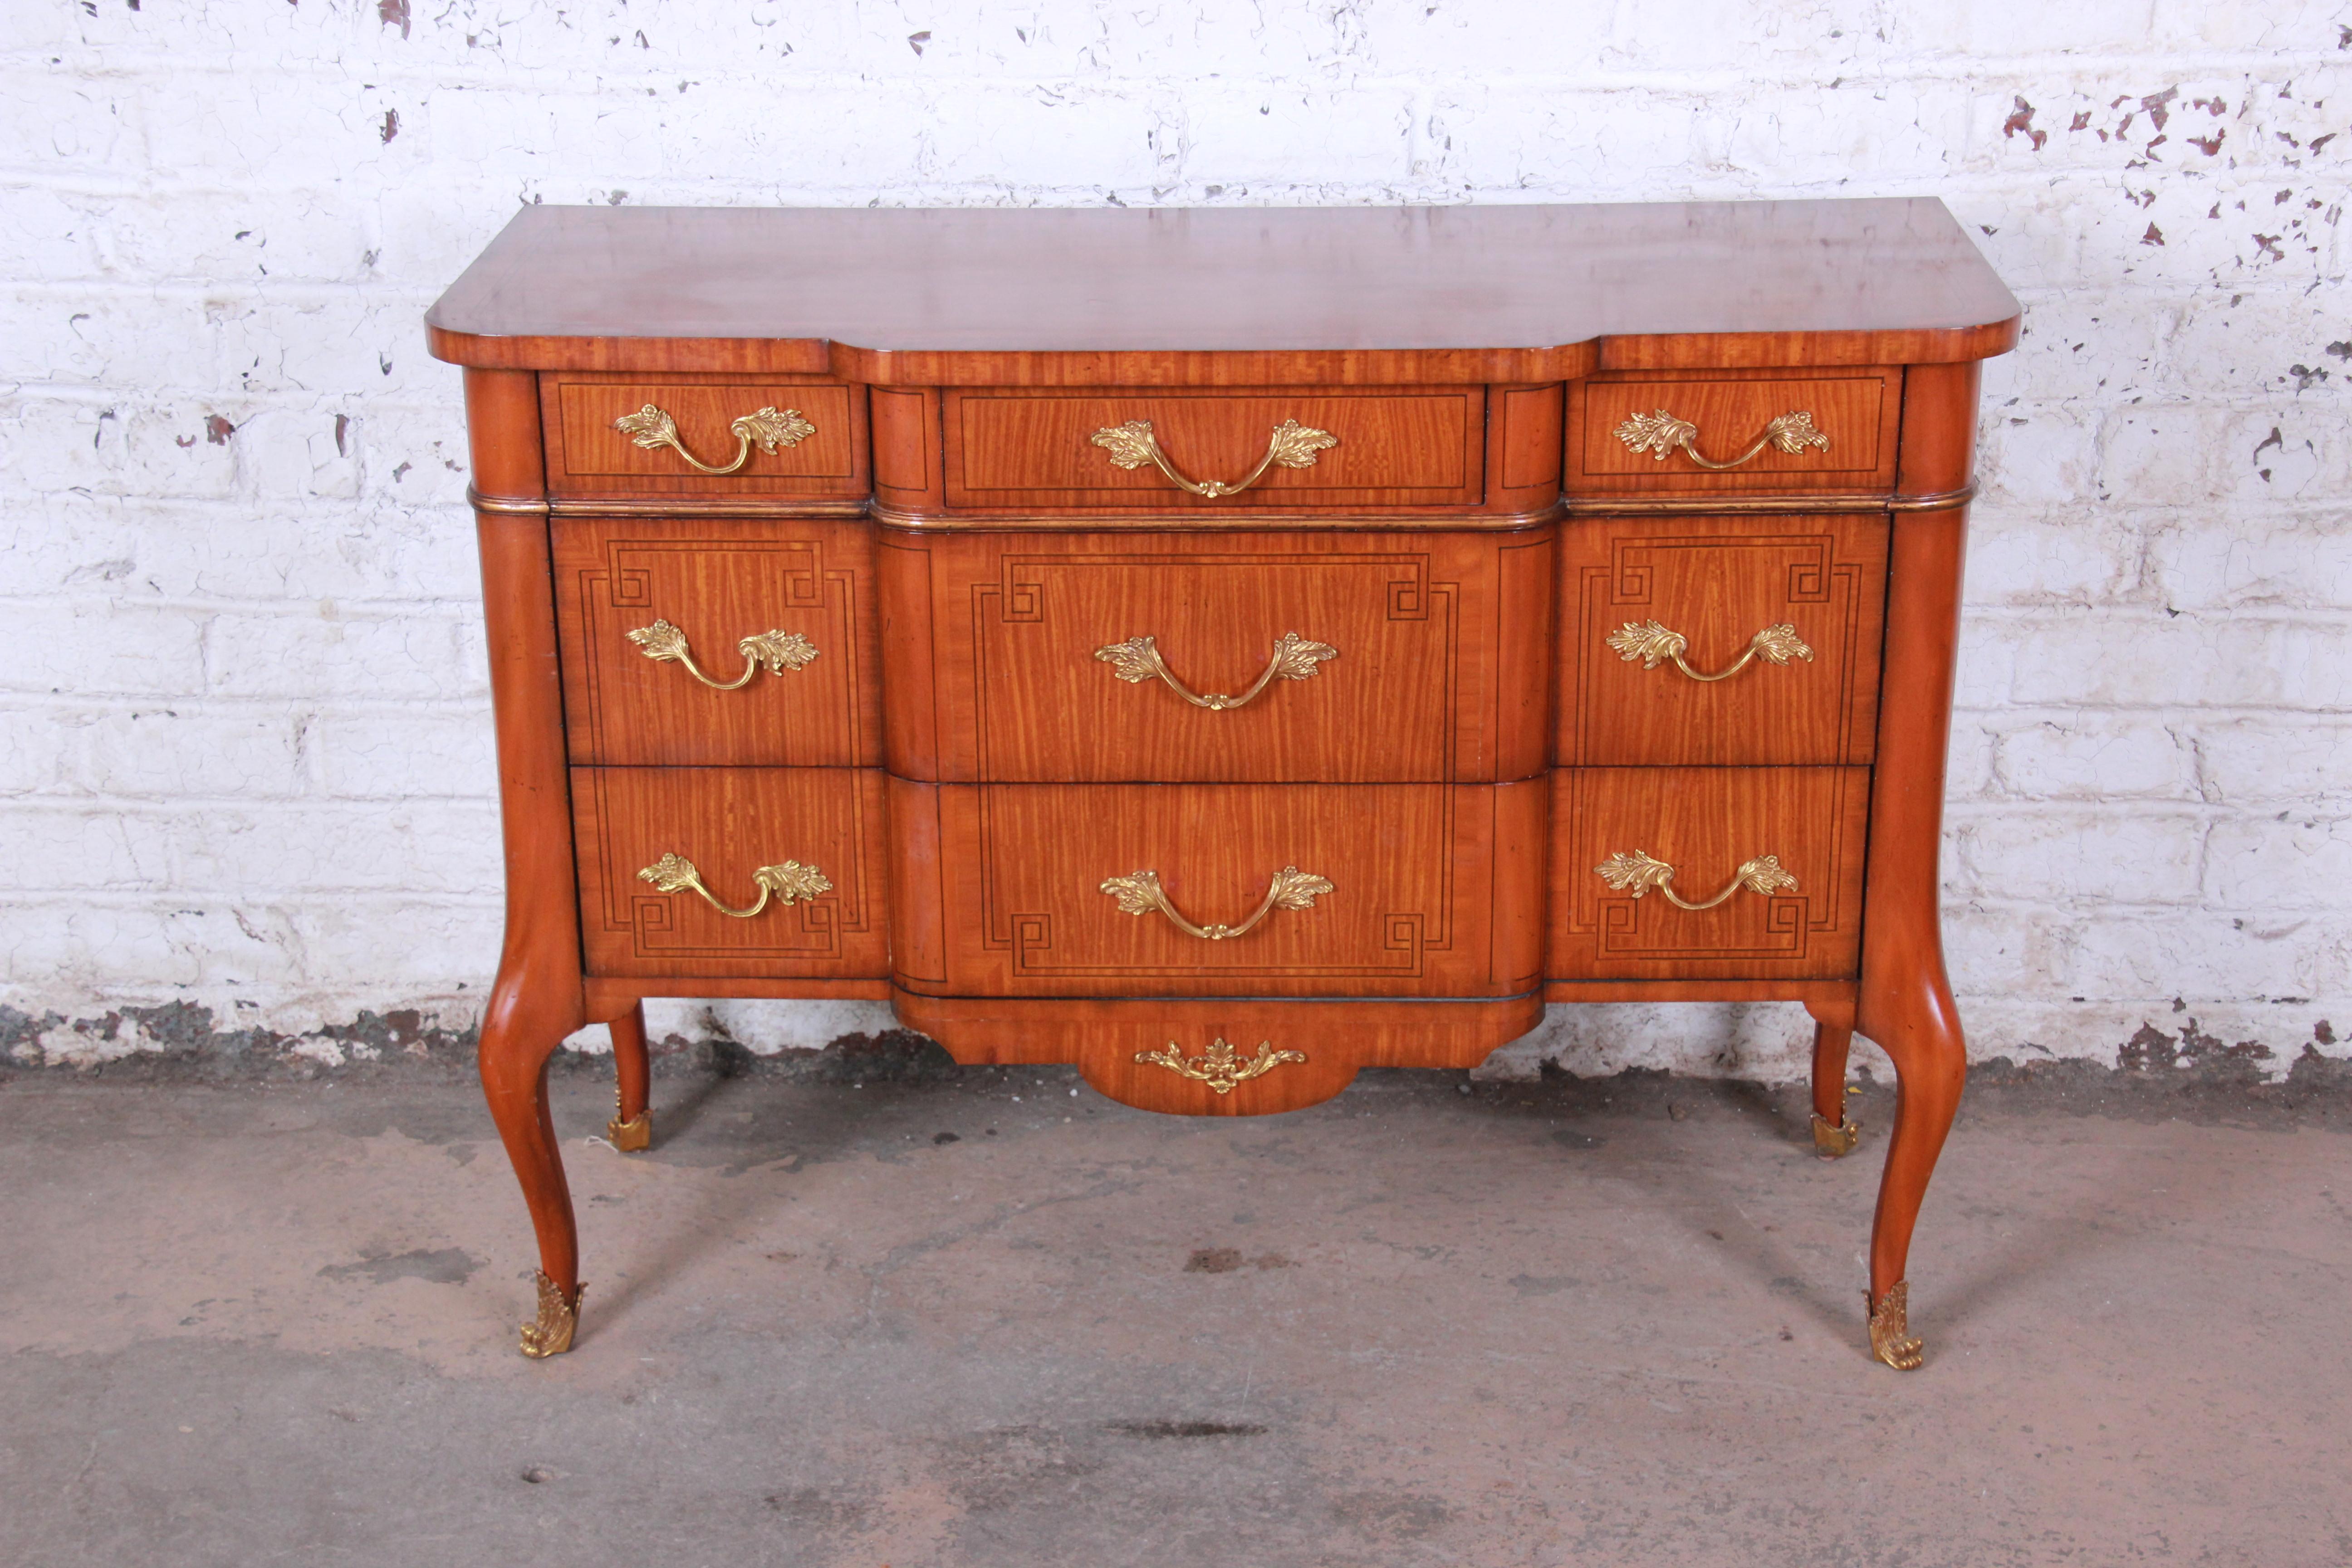 Offering a very nice Maitland-Smith banded and inlaid satinwood dresser or server. The piece has five drawers that offer lots or room for storage and organization. The piece has beautiful inlaid designs and bronze ormolu and brass details